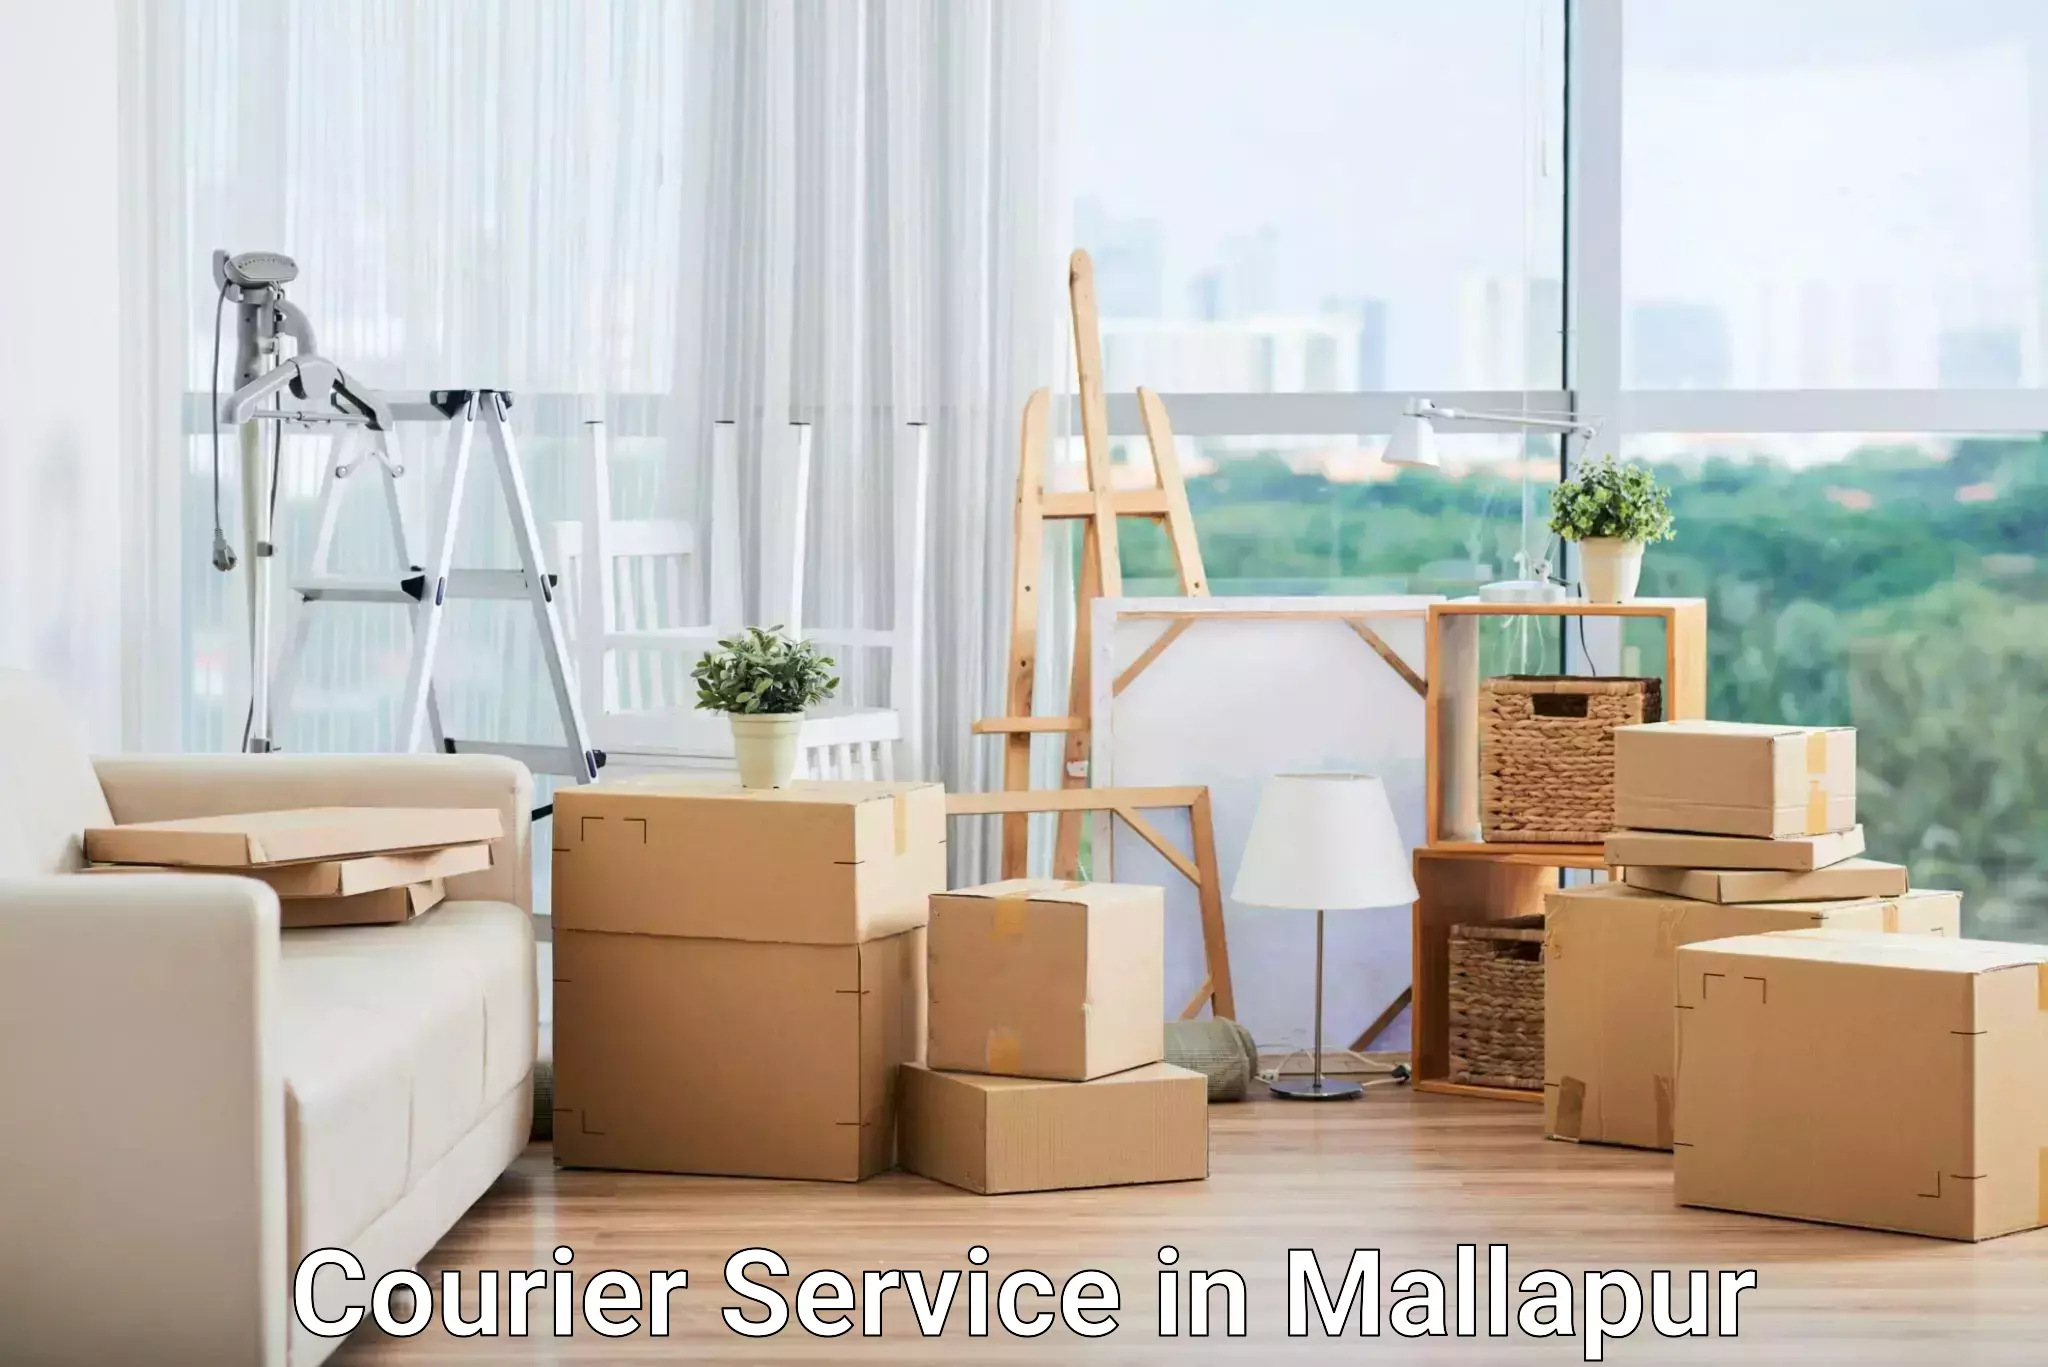 Expedited shipping methods in Mallapur